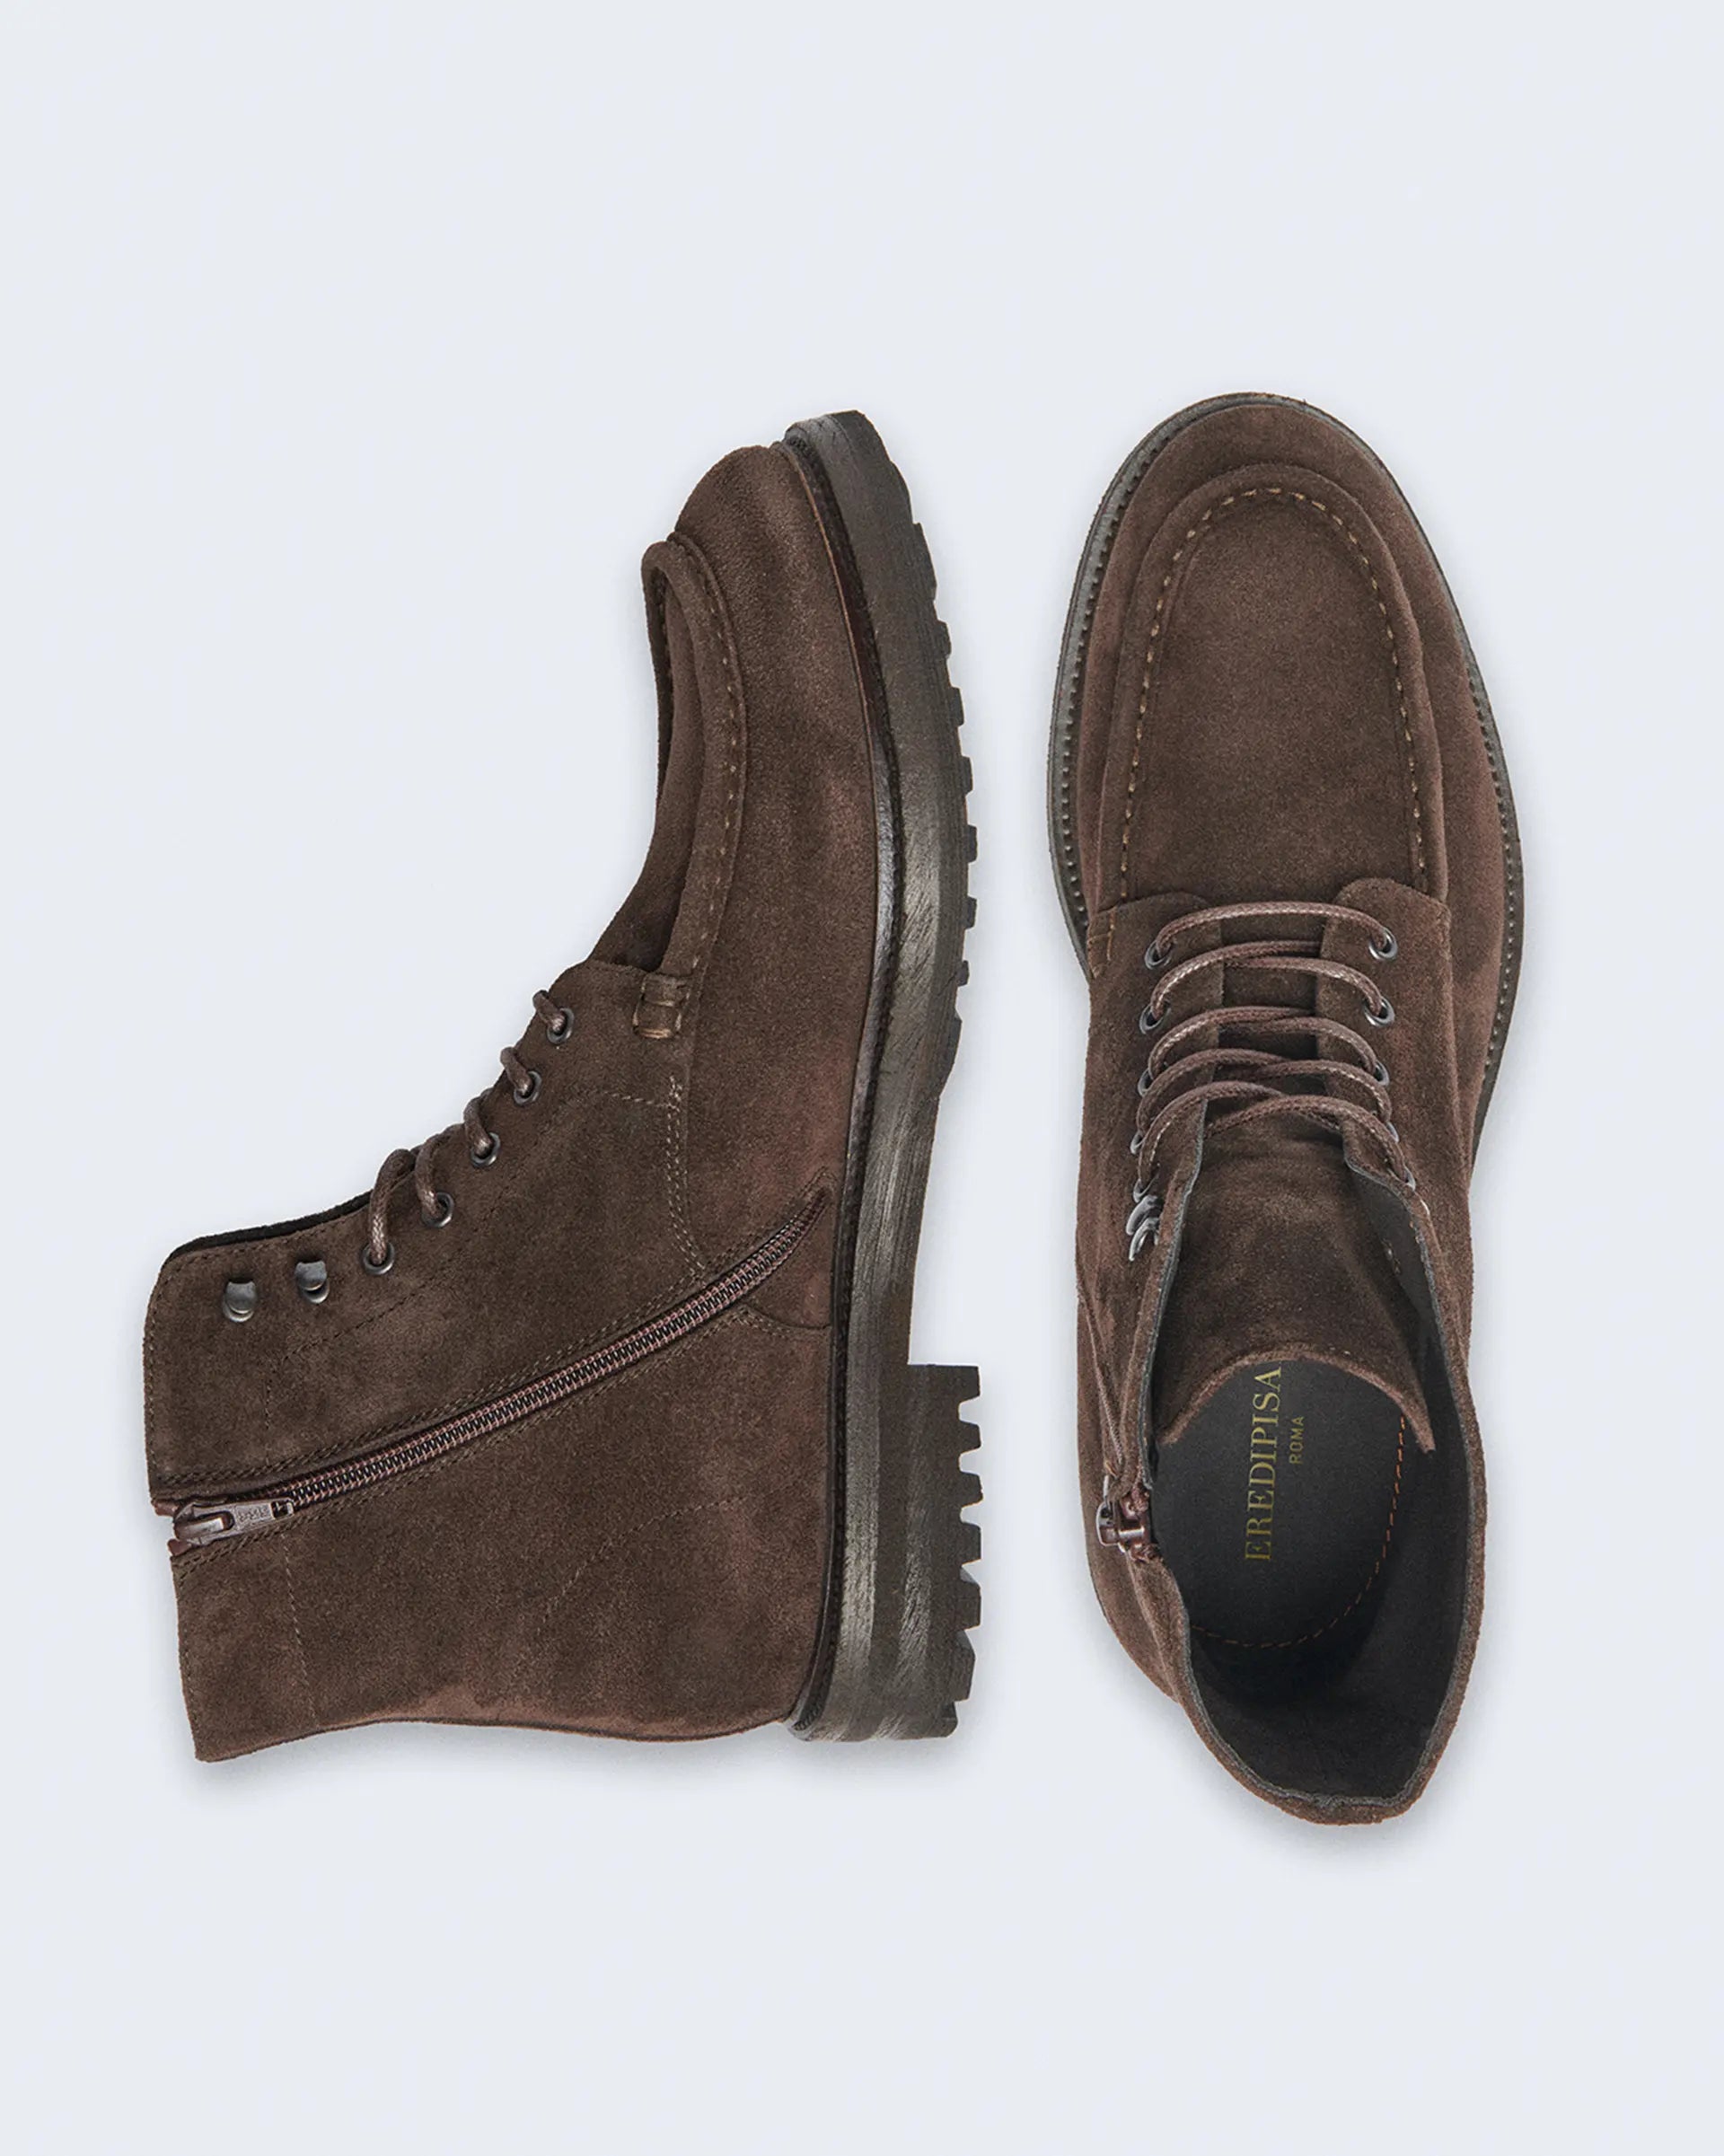 Lace-up boot in dark brown suede